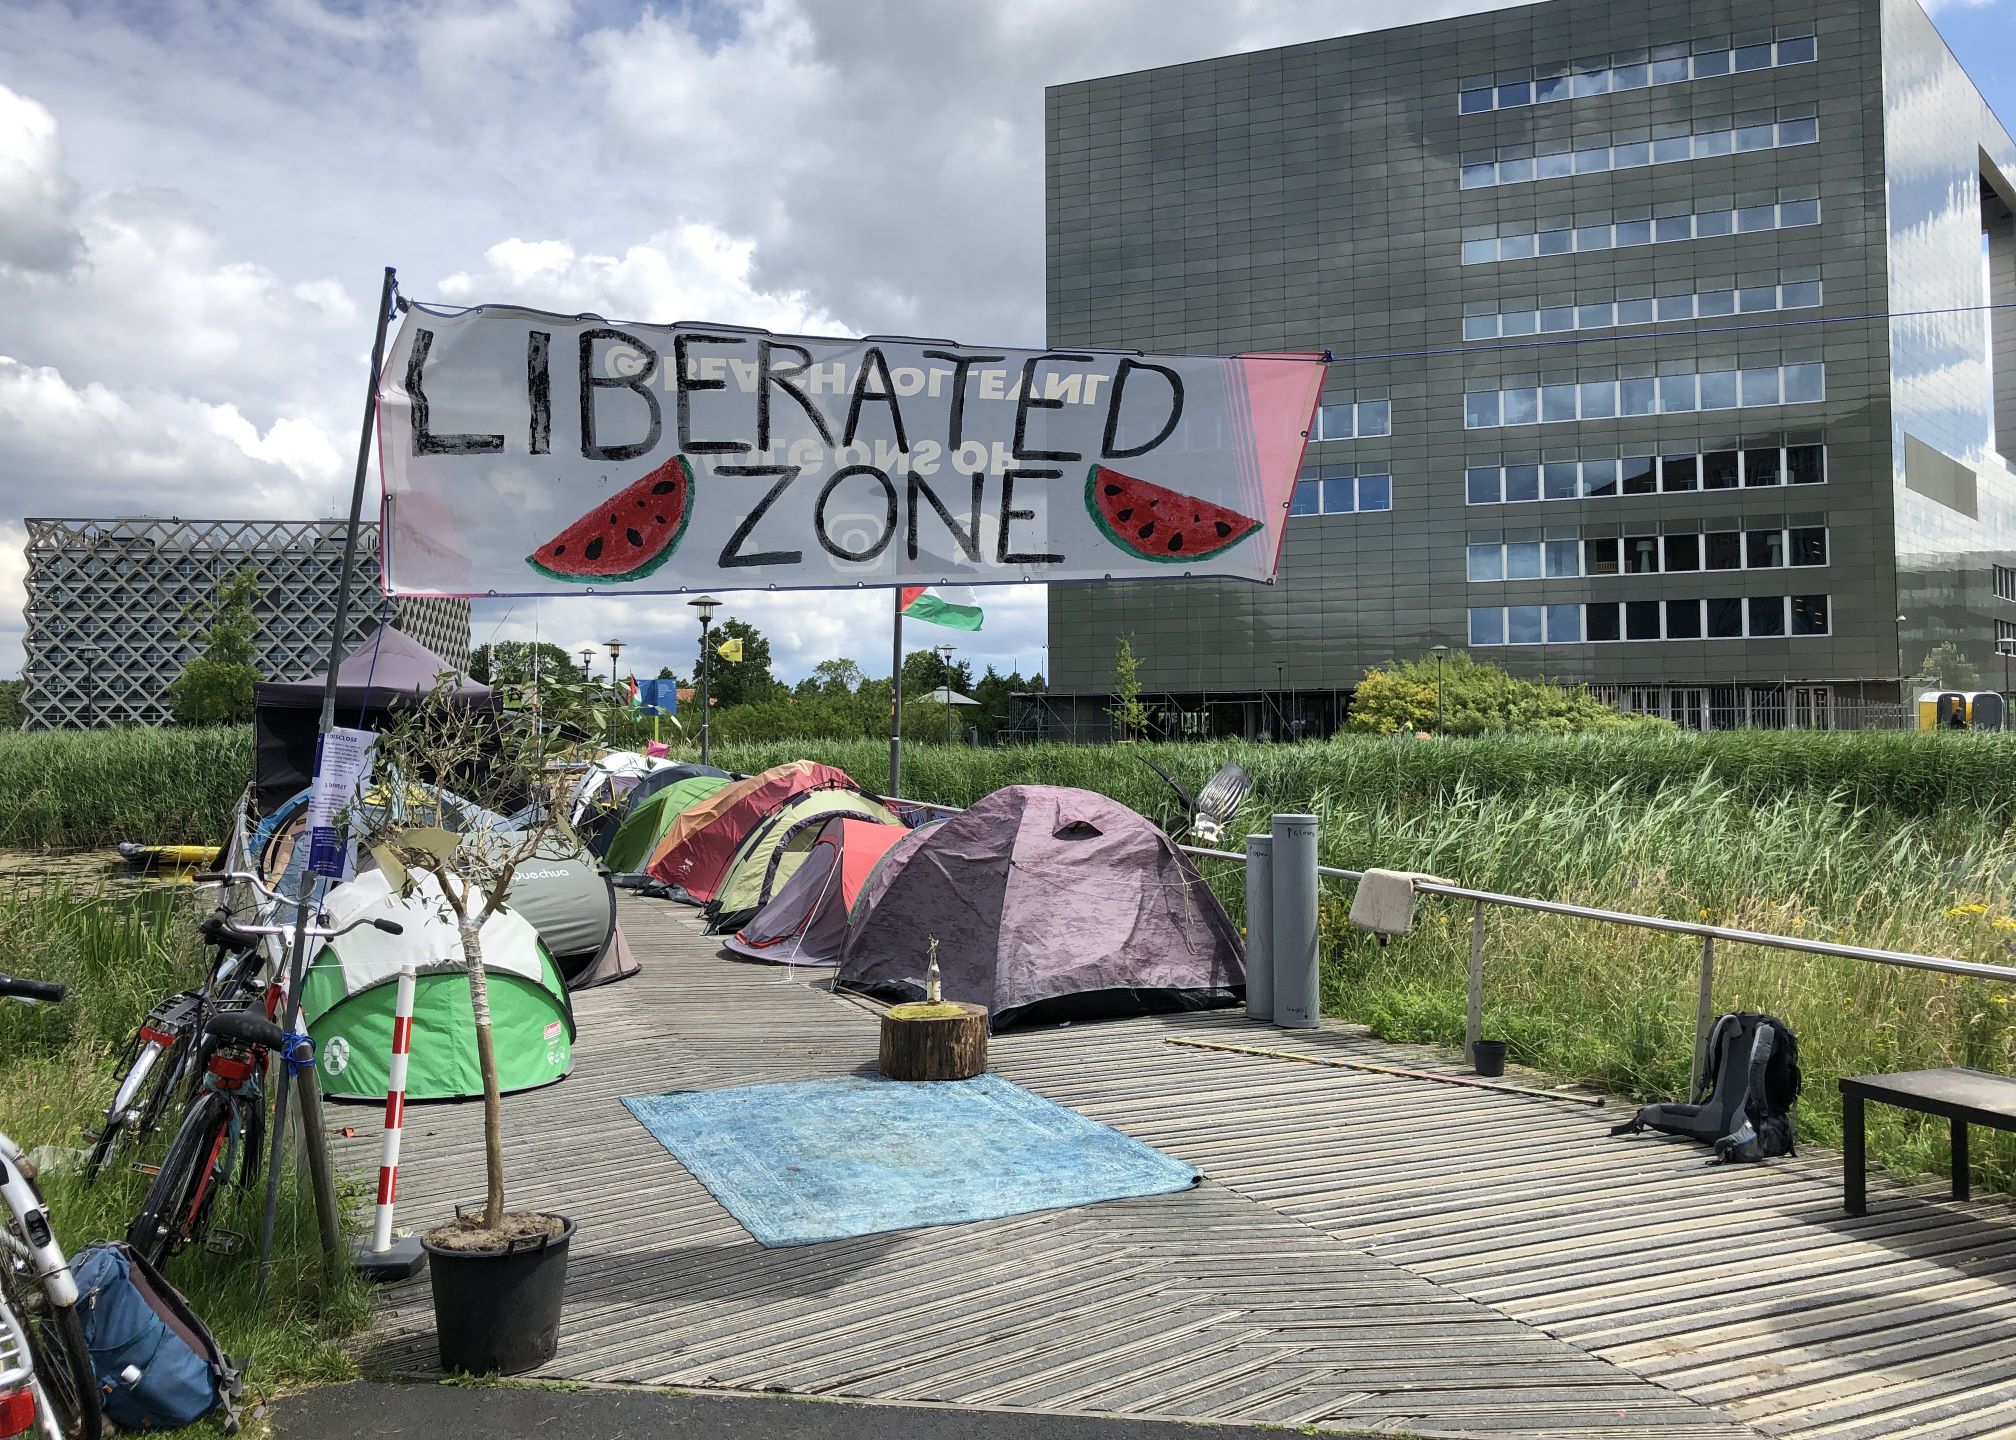 Protest update: activists plan to keep the camp